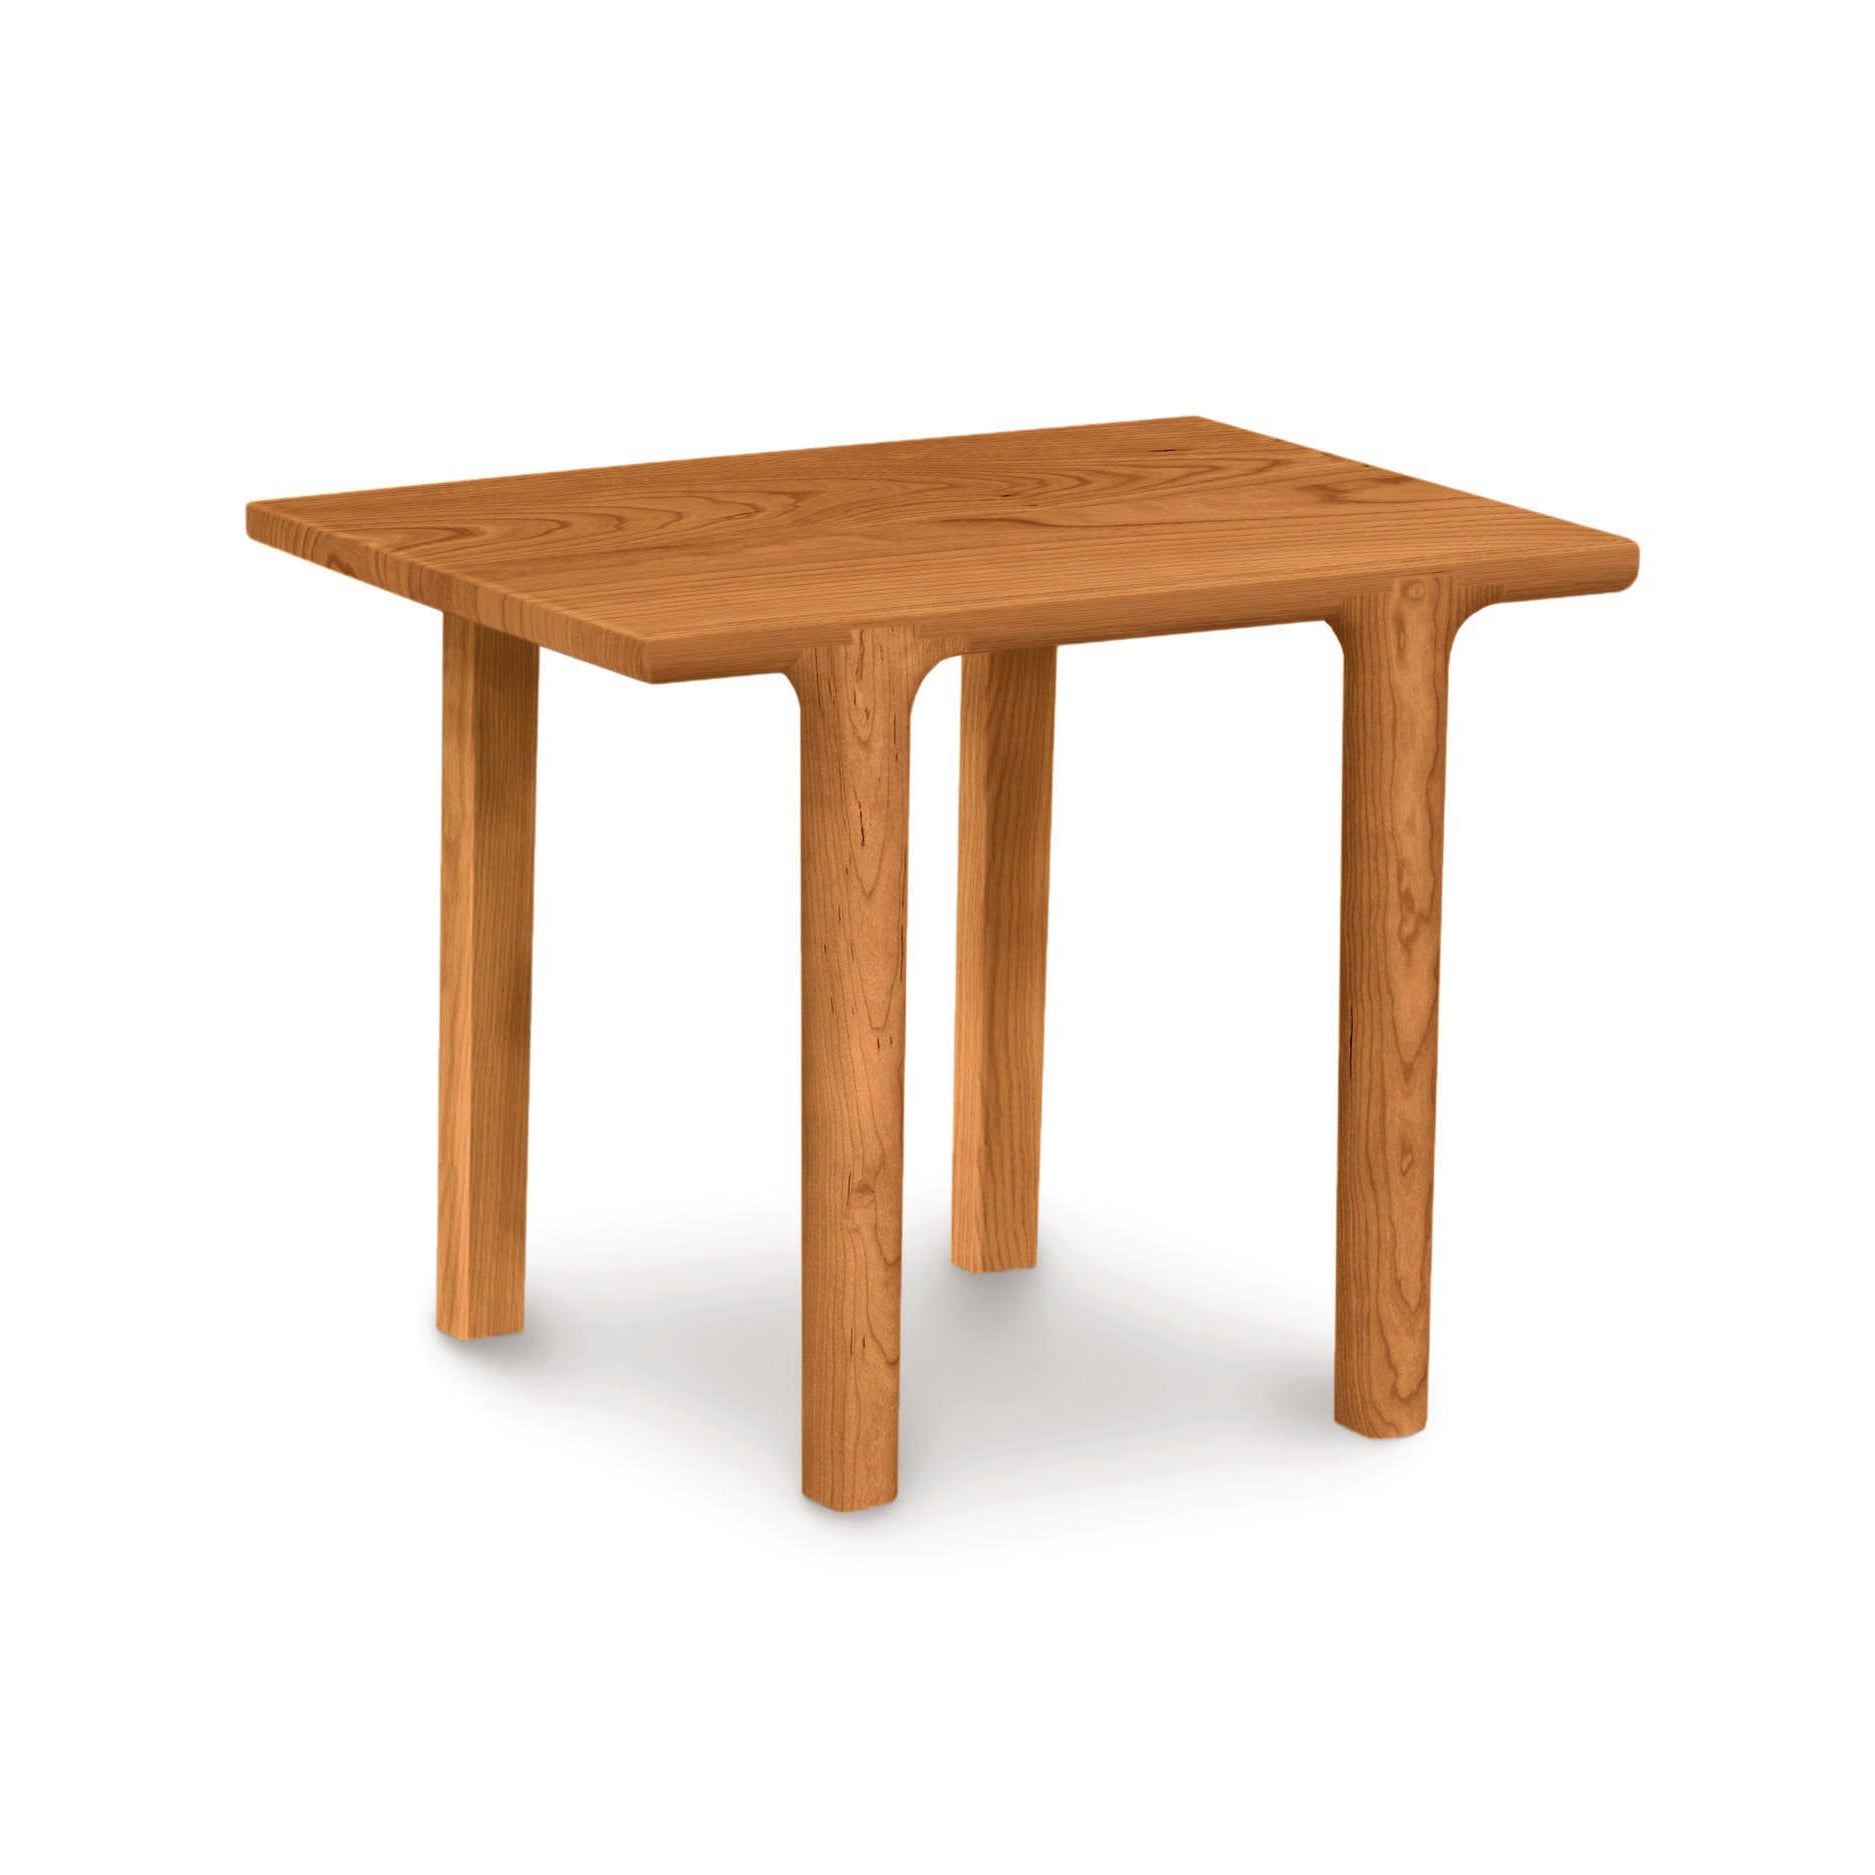 A simple solid Sierra Rectangular End Table from Copeland Furniture with four legs on a white background.